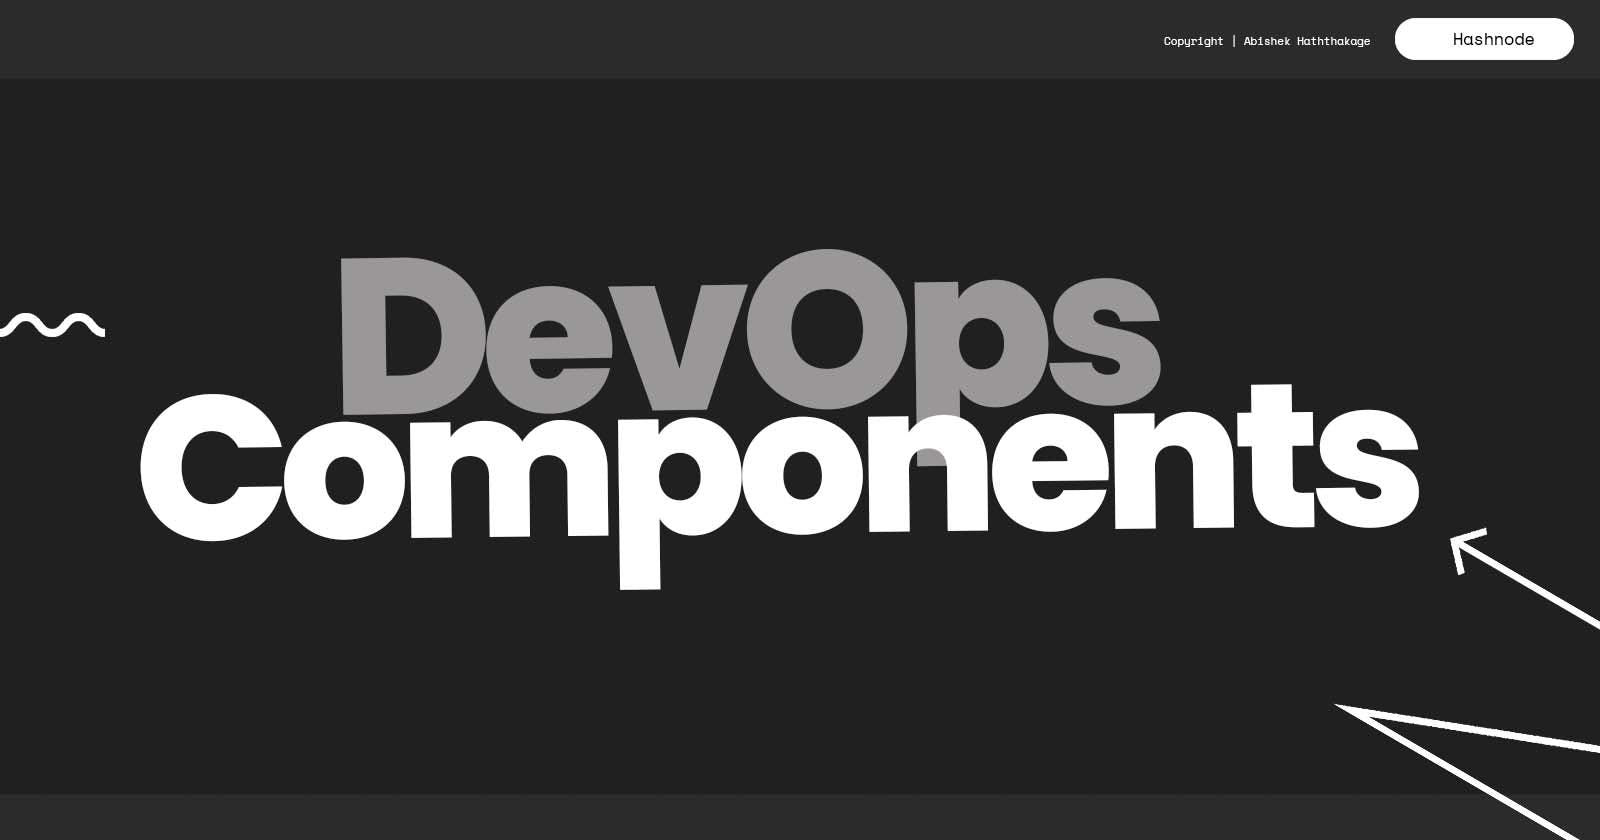 DevOps Components: Build, Code, Test, Plan, Monitor, Deploy, Operate, Release